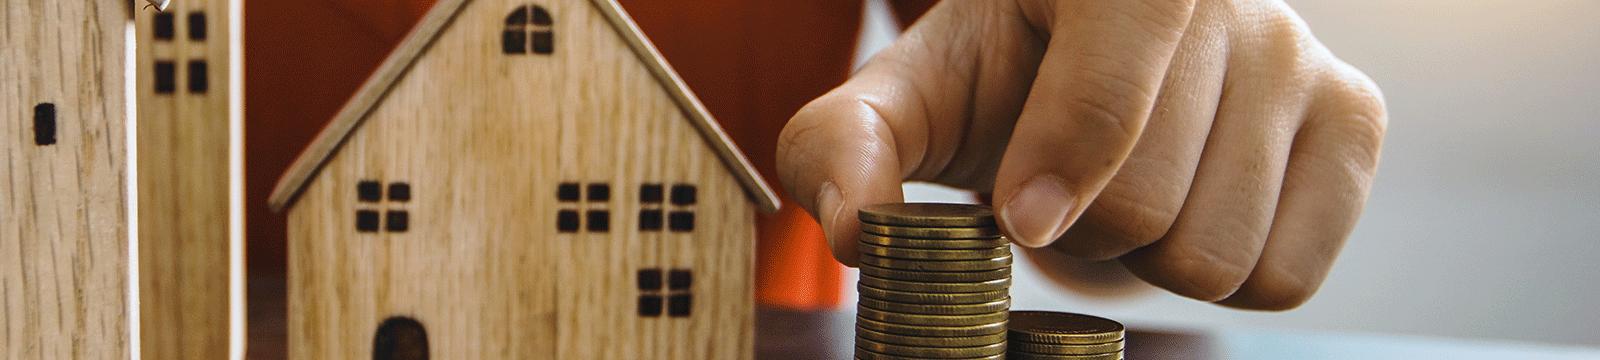 Close up of hand stacking pennies with wooden house models in the background.